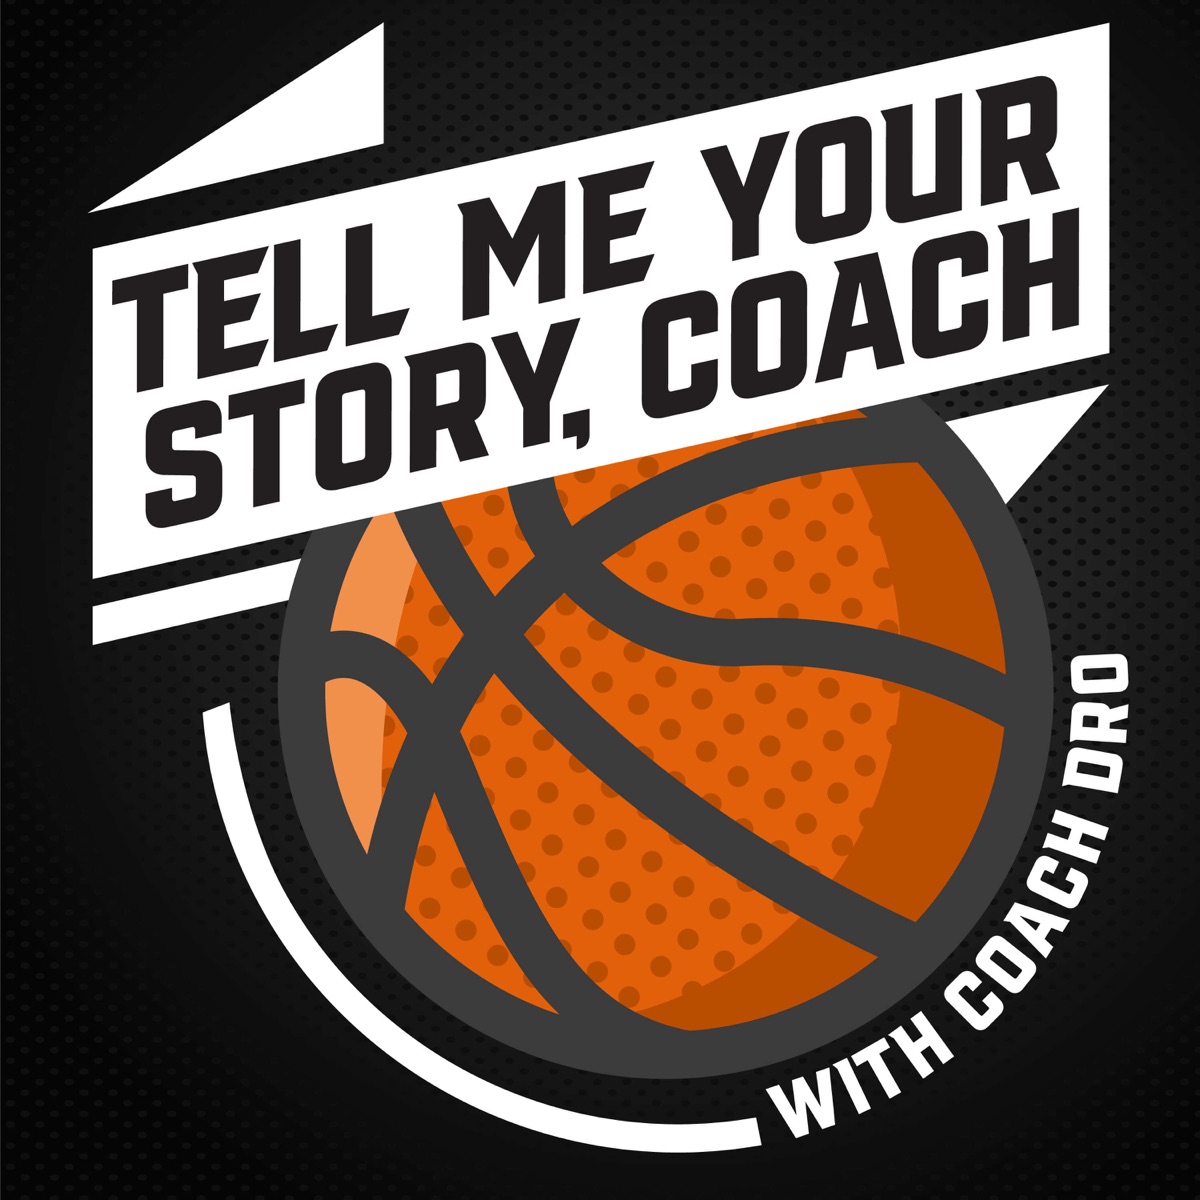 Tell Me Your Story Coach – Podcast – Podtail